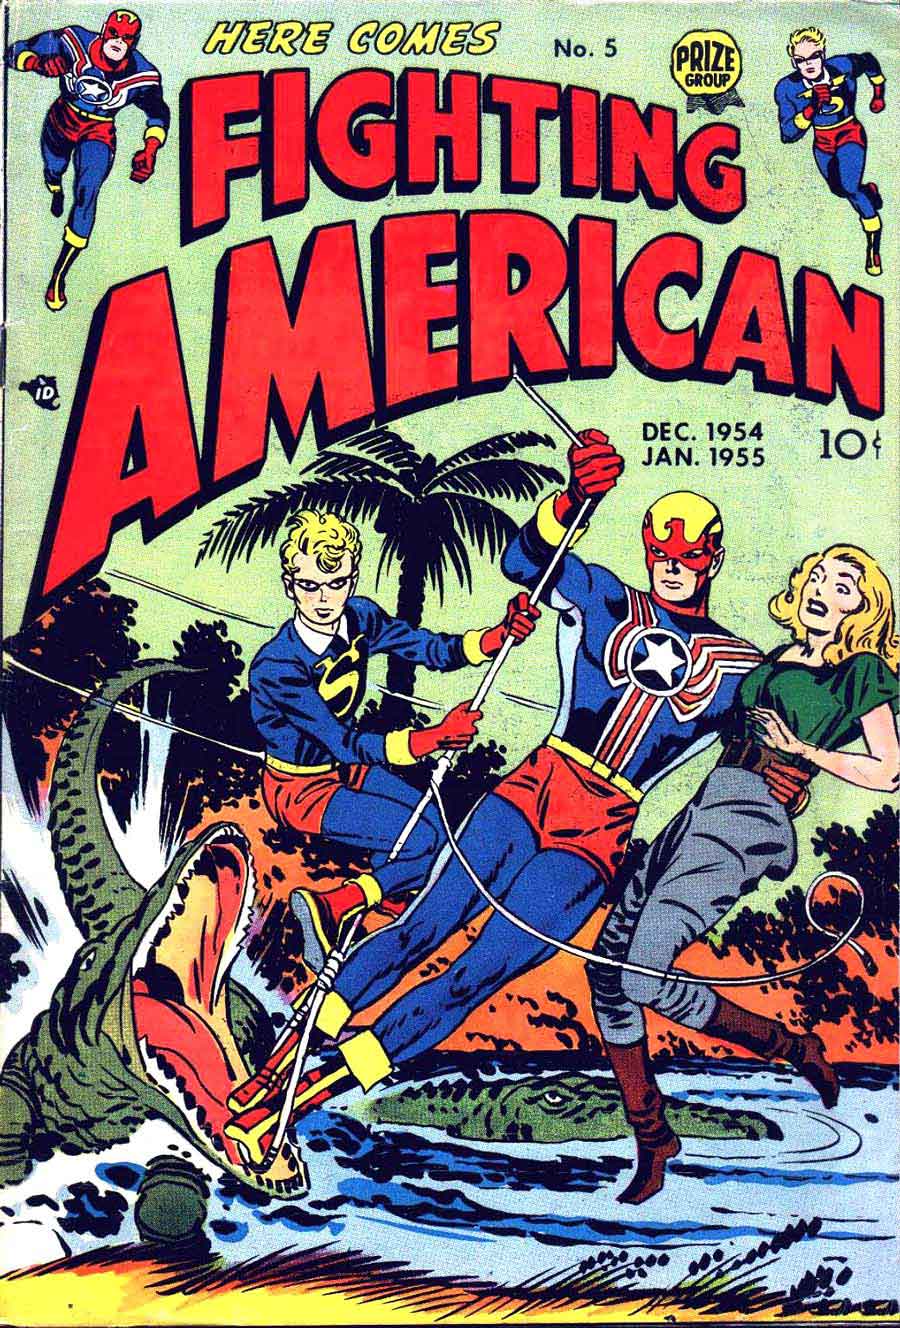 Fighting American v1 #5 harvey comic book cover art by Jack Kirby